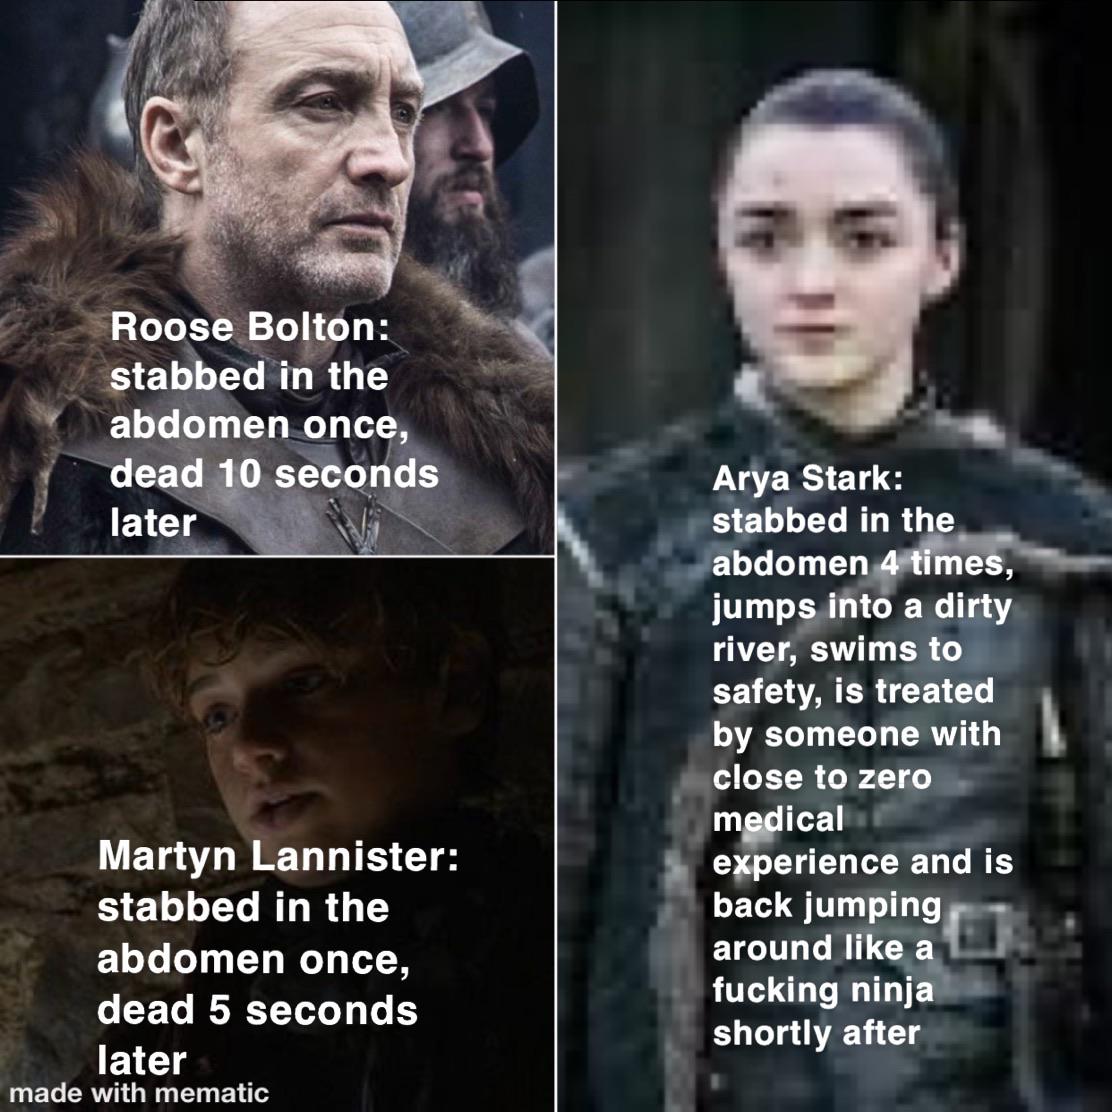 Game of thrones, Arya, Season, Jon, Dany, Sandor Game of thrones memes Game of thrones, Arya, Season, Jon, Dany, Sandor text: Roose Bolton• stabbed in the abdomen once, dead 10 seconds later Martyn Lannister: stabbed in the abdomen once, dead 5 seconds later made with mematic Arya Stark: stabbed in the . g abdomen&åtimes, jumps ihto a dirty river, swims to safety, is treated by someone with close to ze *cal and is back jumping around like a fucking ninja shortly after 